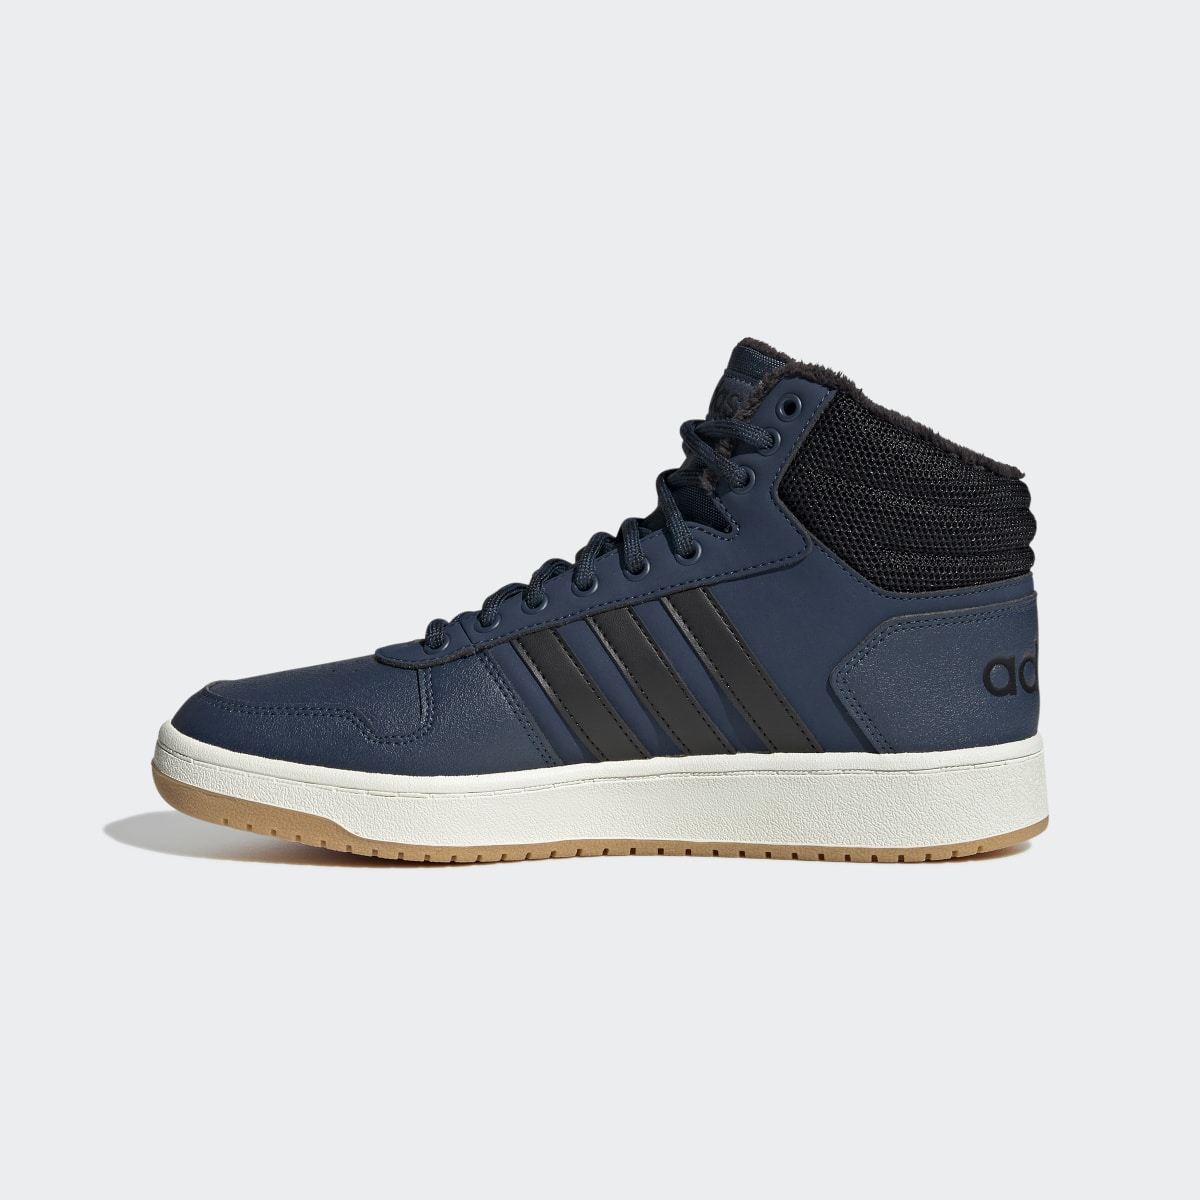 Adidas Hoops 2.0 Mid Shoes. 7